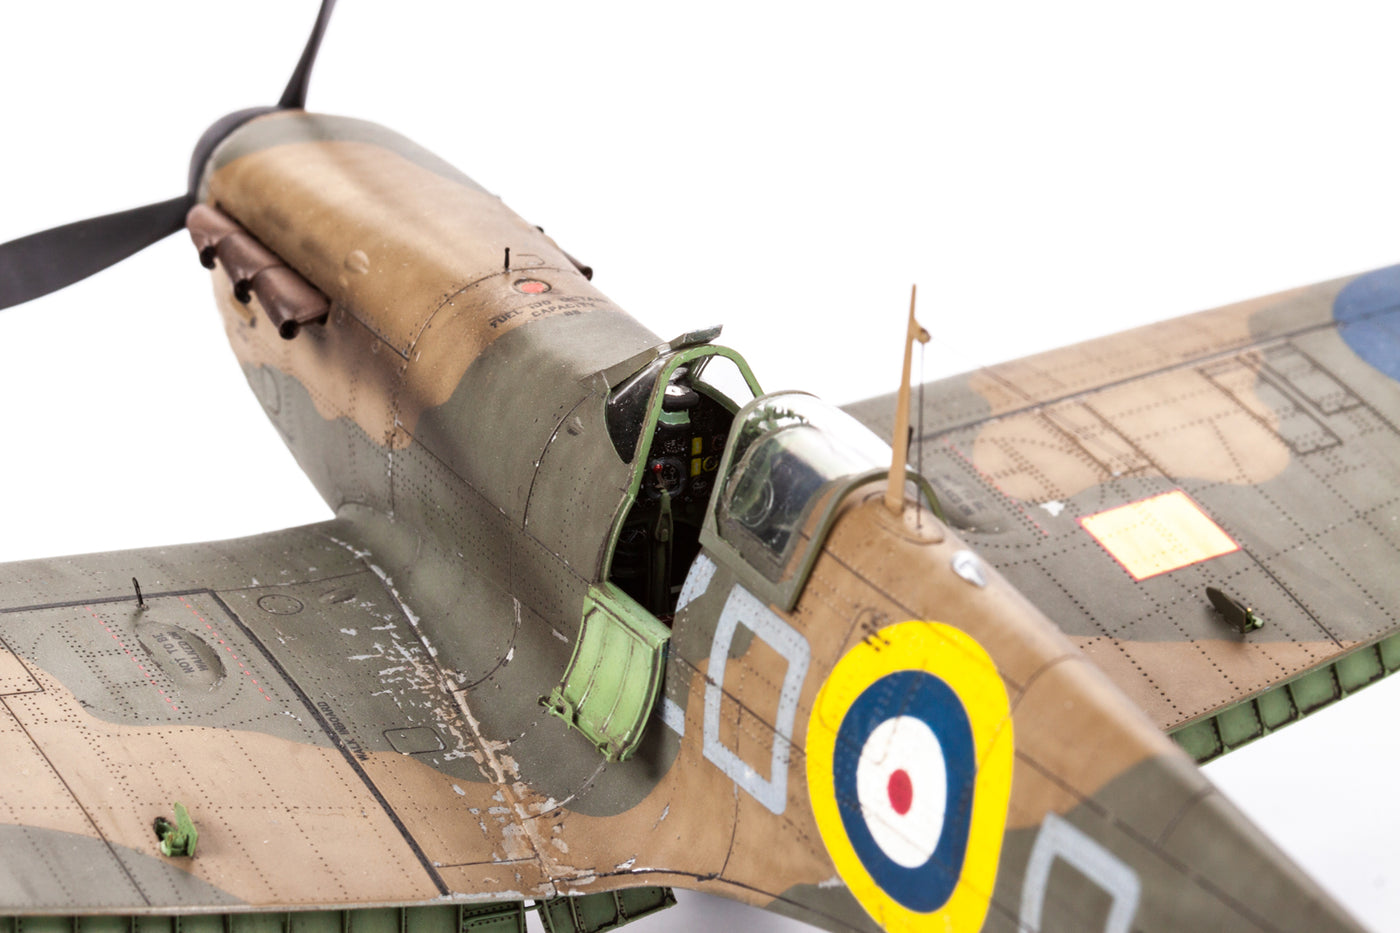 11143 1/48 British WWII Spitfire Mk.I THE SPITFIRE STORY Limited edition